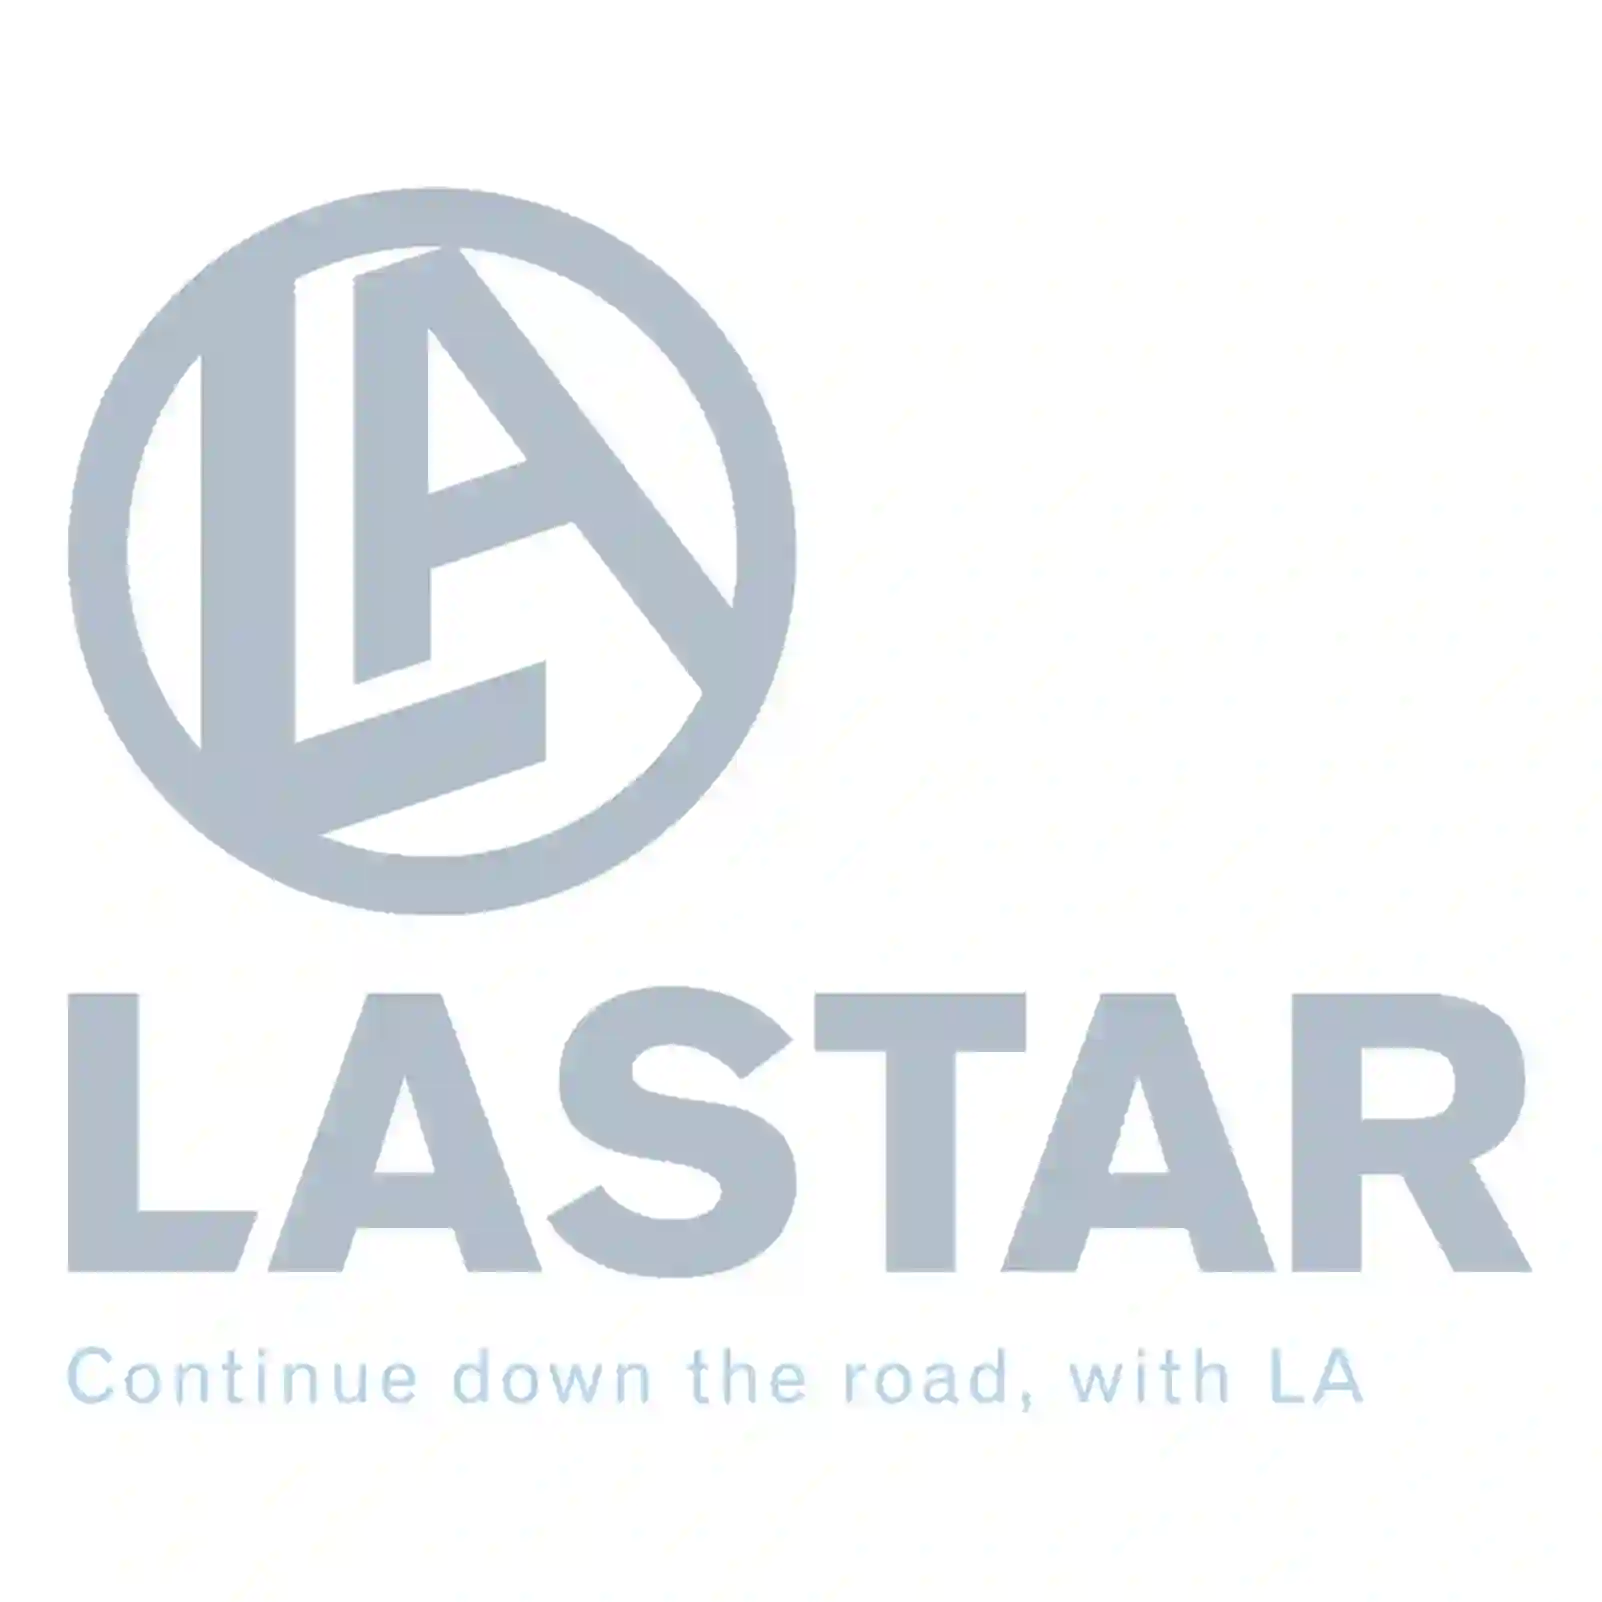  Radiator, without air conditioning || Lastar Spare Part | Truck Spare Parts, Auotomotive Spare Parts